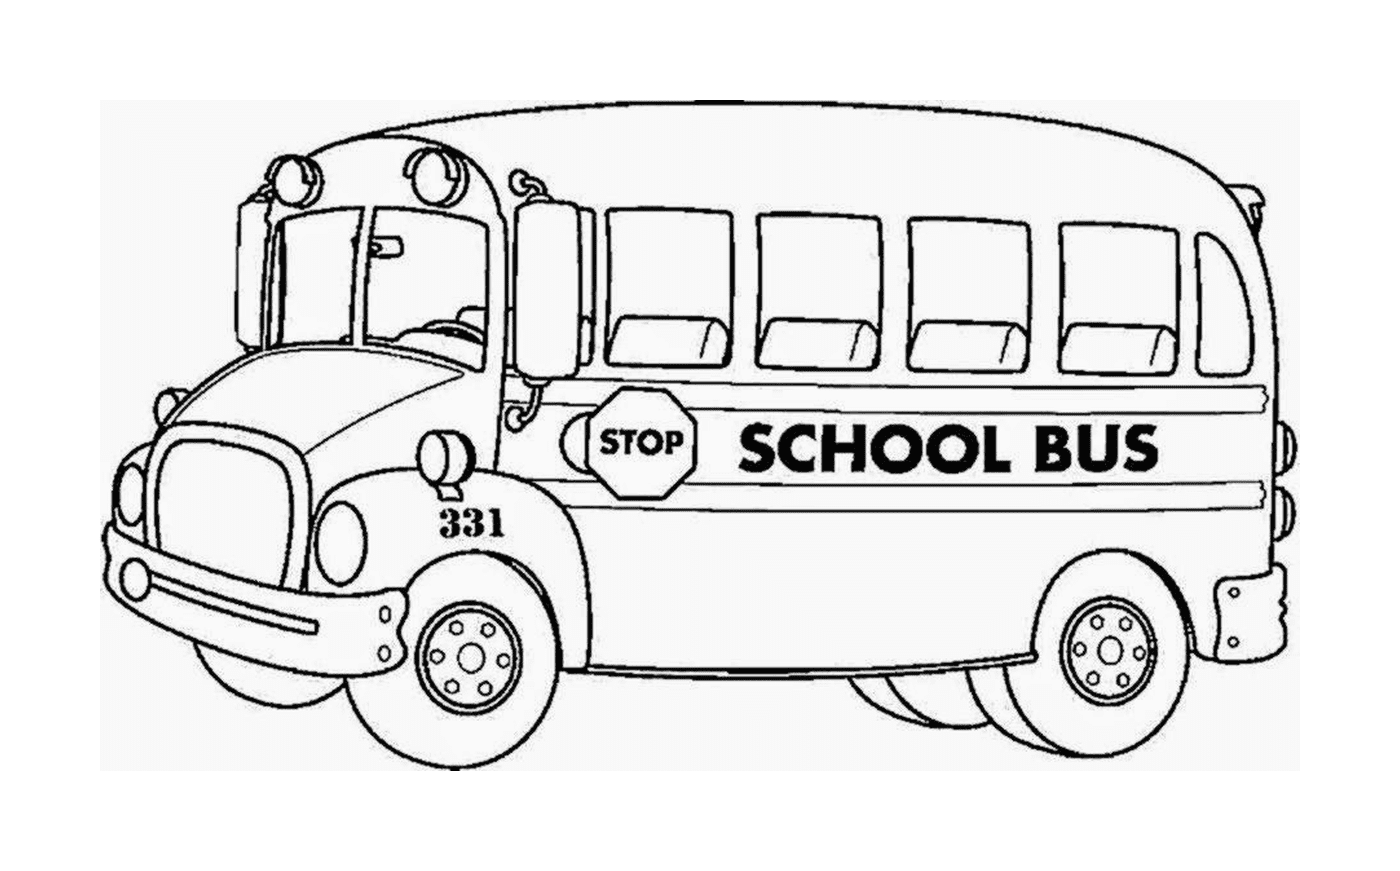  A black and white school bus for children 